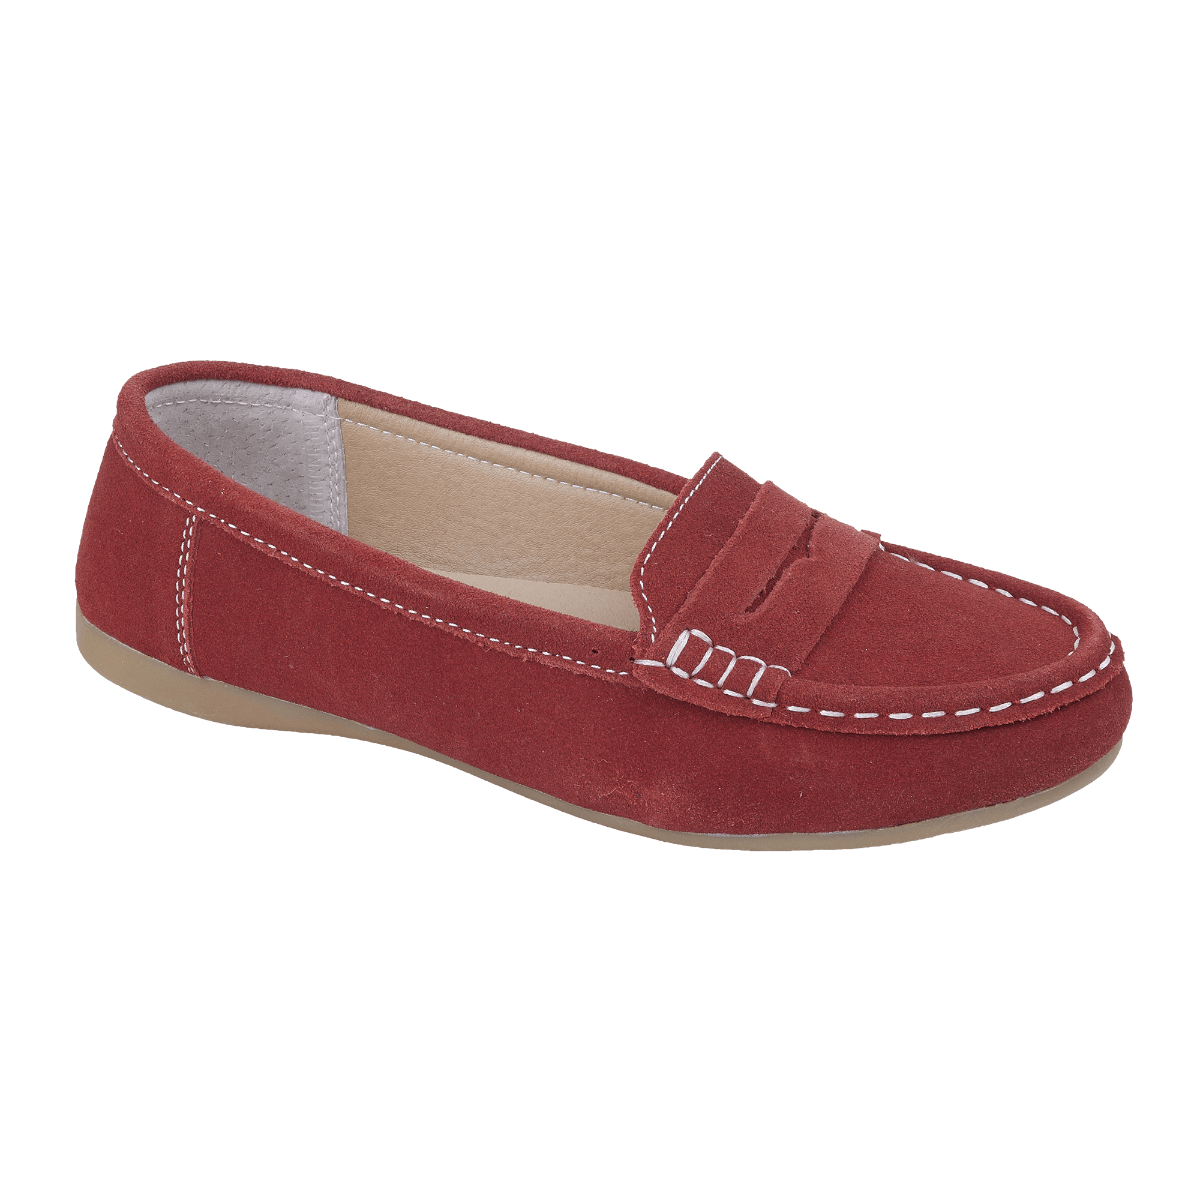 Monaco Real Suede Loafer - Red